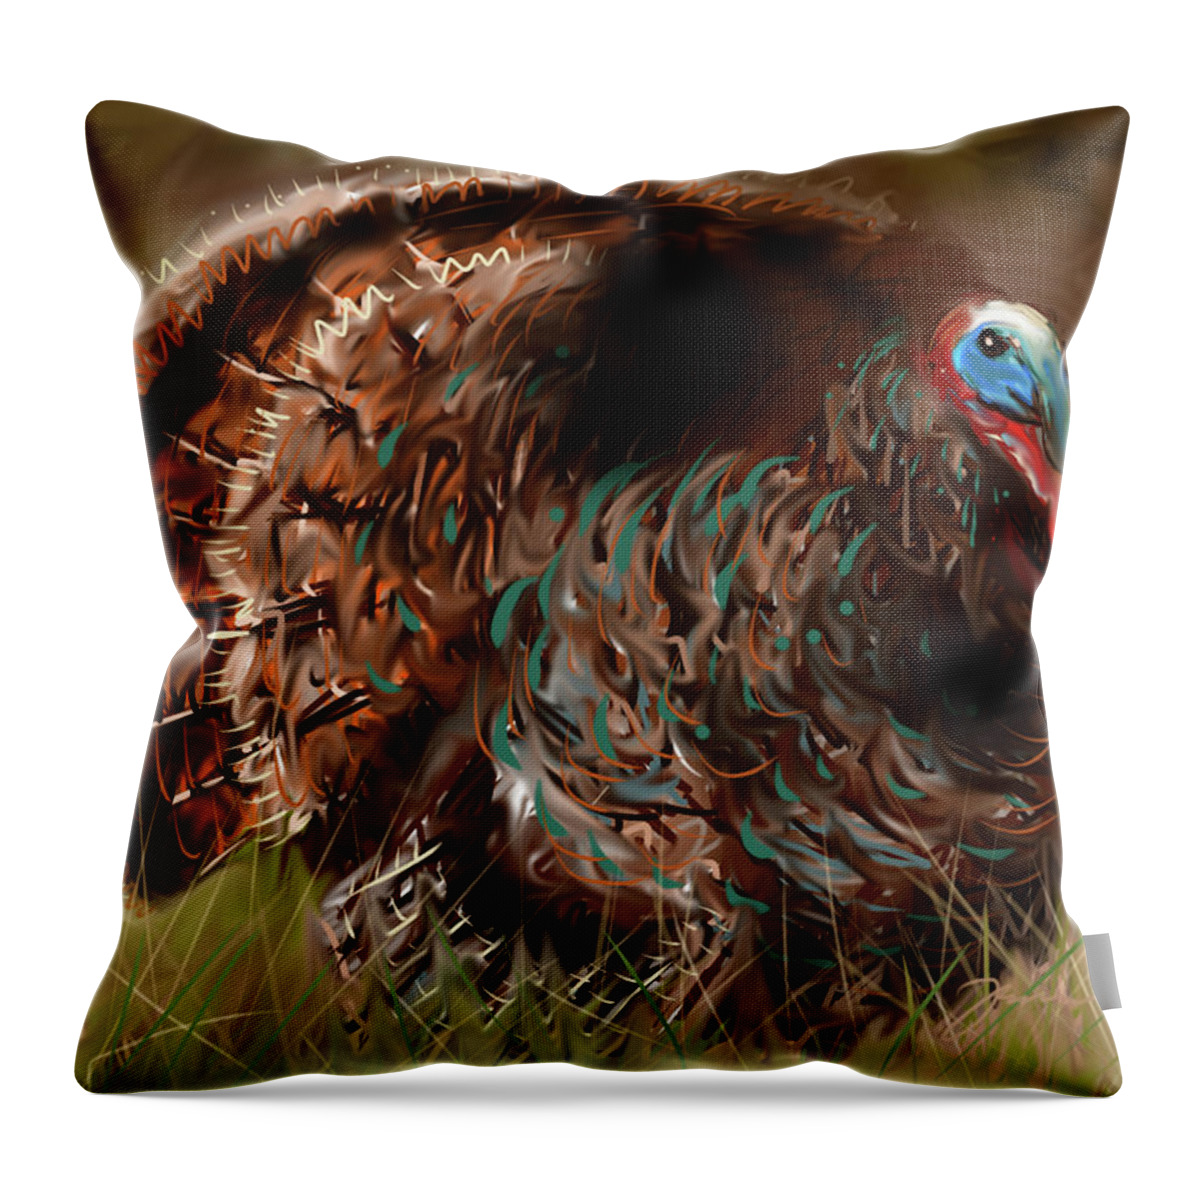 Turkey Throw Pillow featuring the painting Turkey In The Straw by Jean Pacheco Ravinski